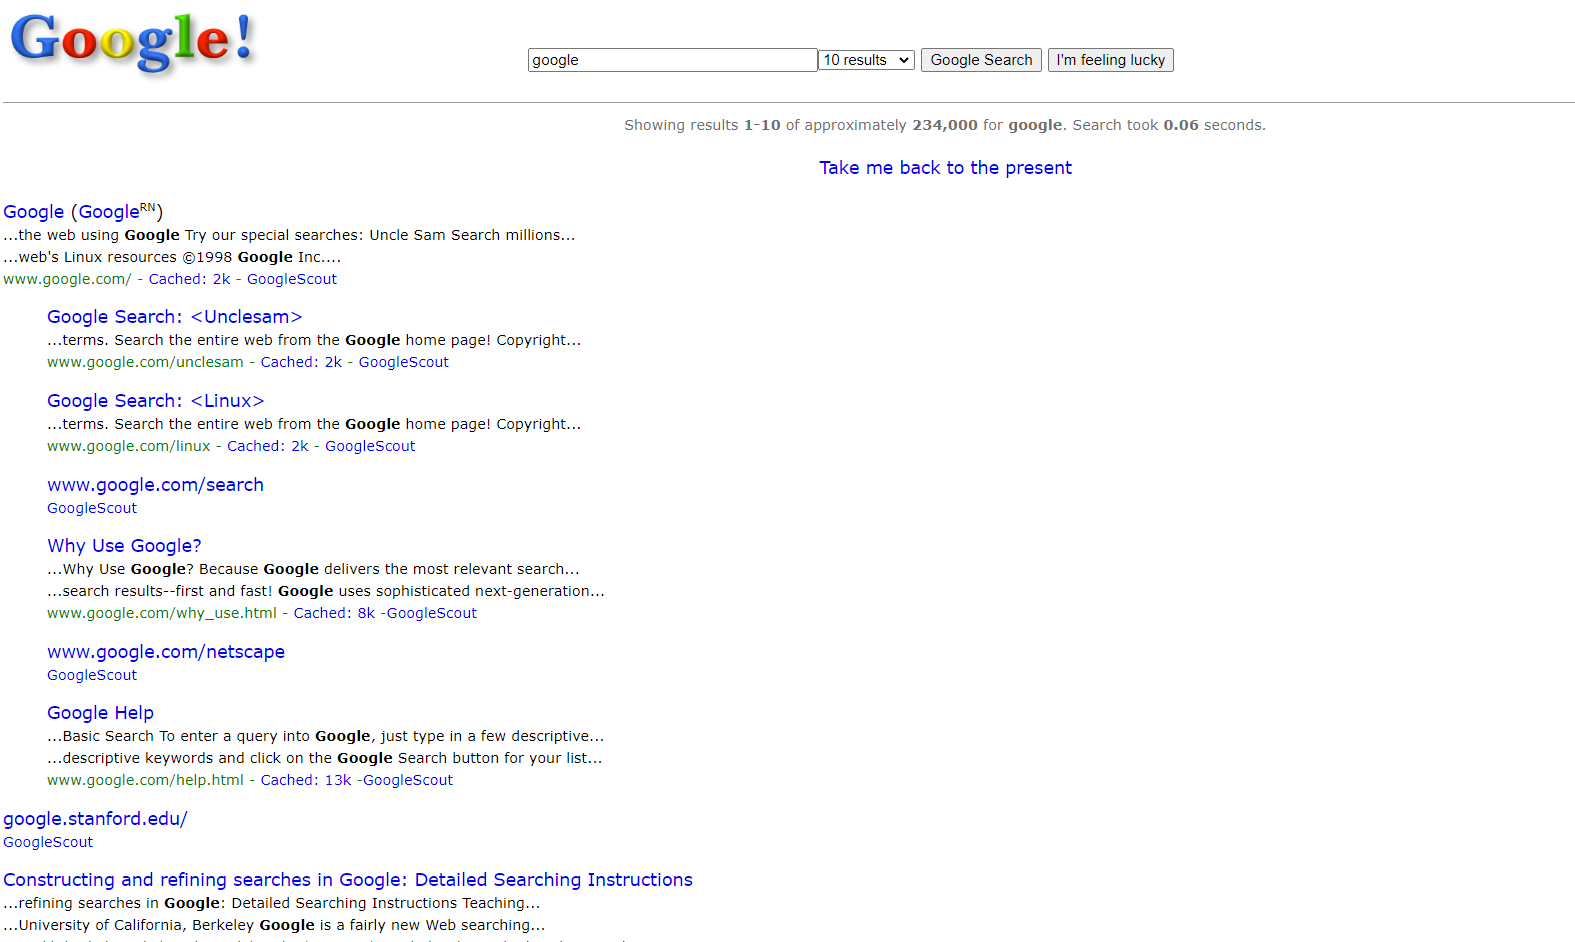 Bing Easter Egg Lets You Play Snake In The Search Results